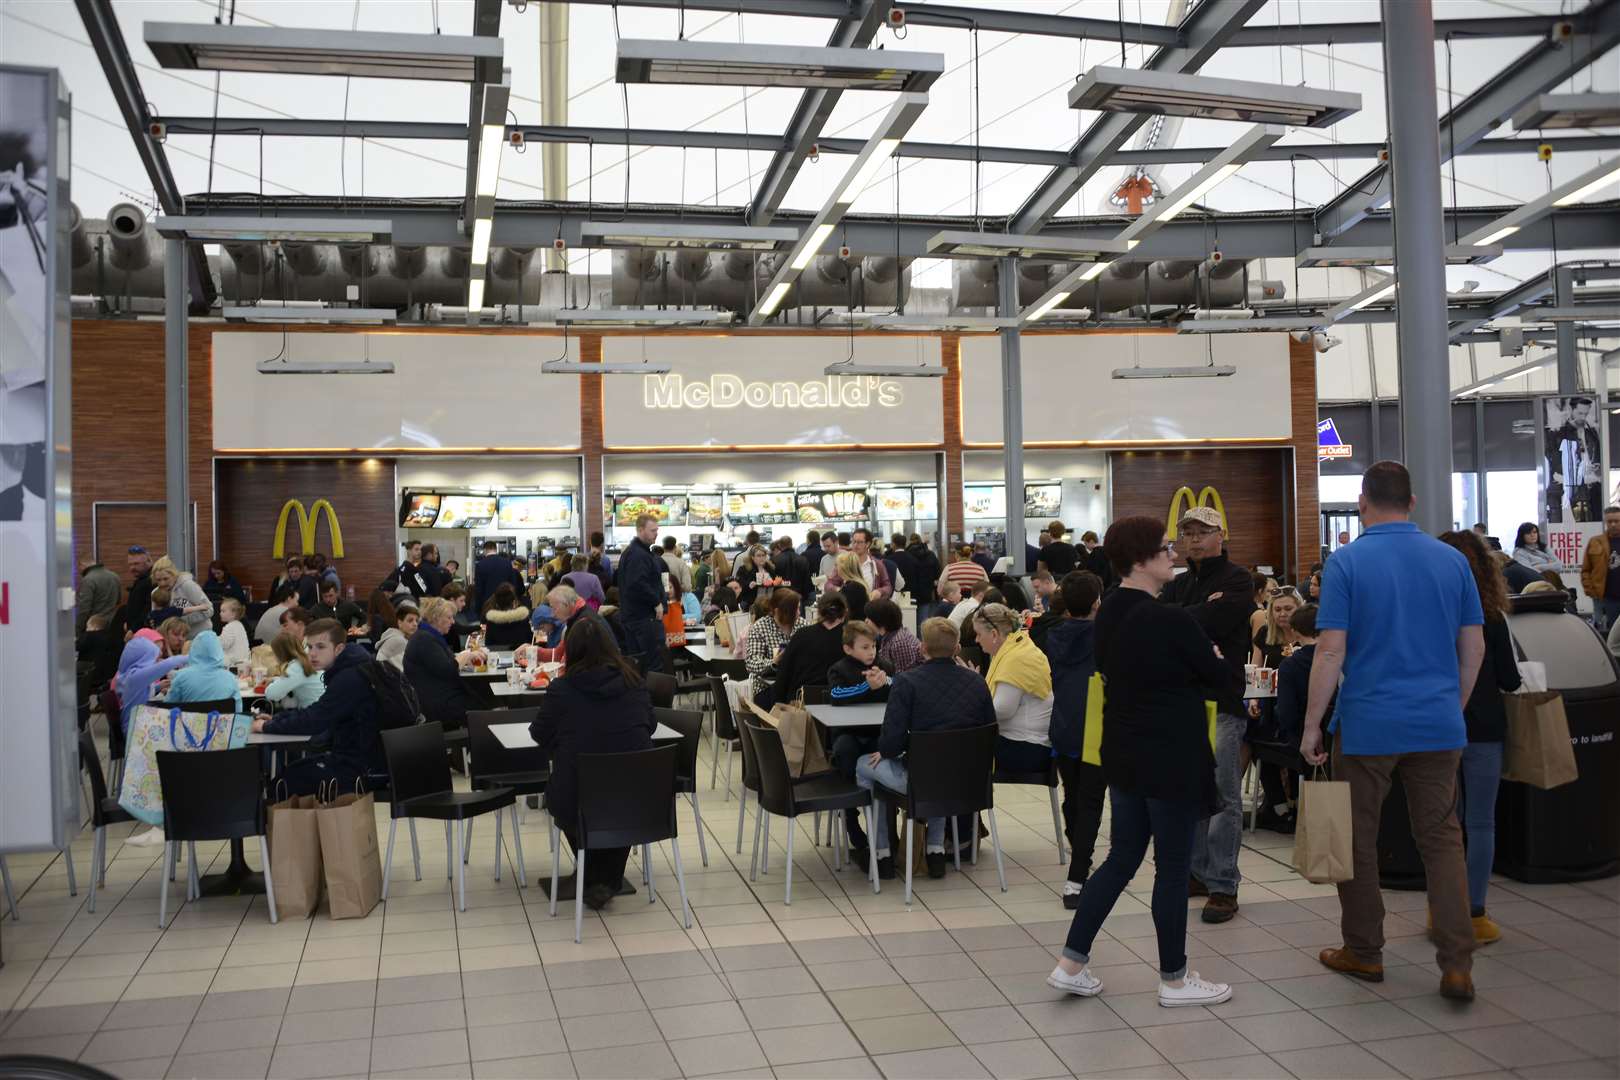 McDonald's was set to rejoin the Designer Outlet when the extension was built, but has not returned